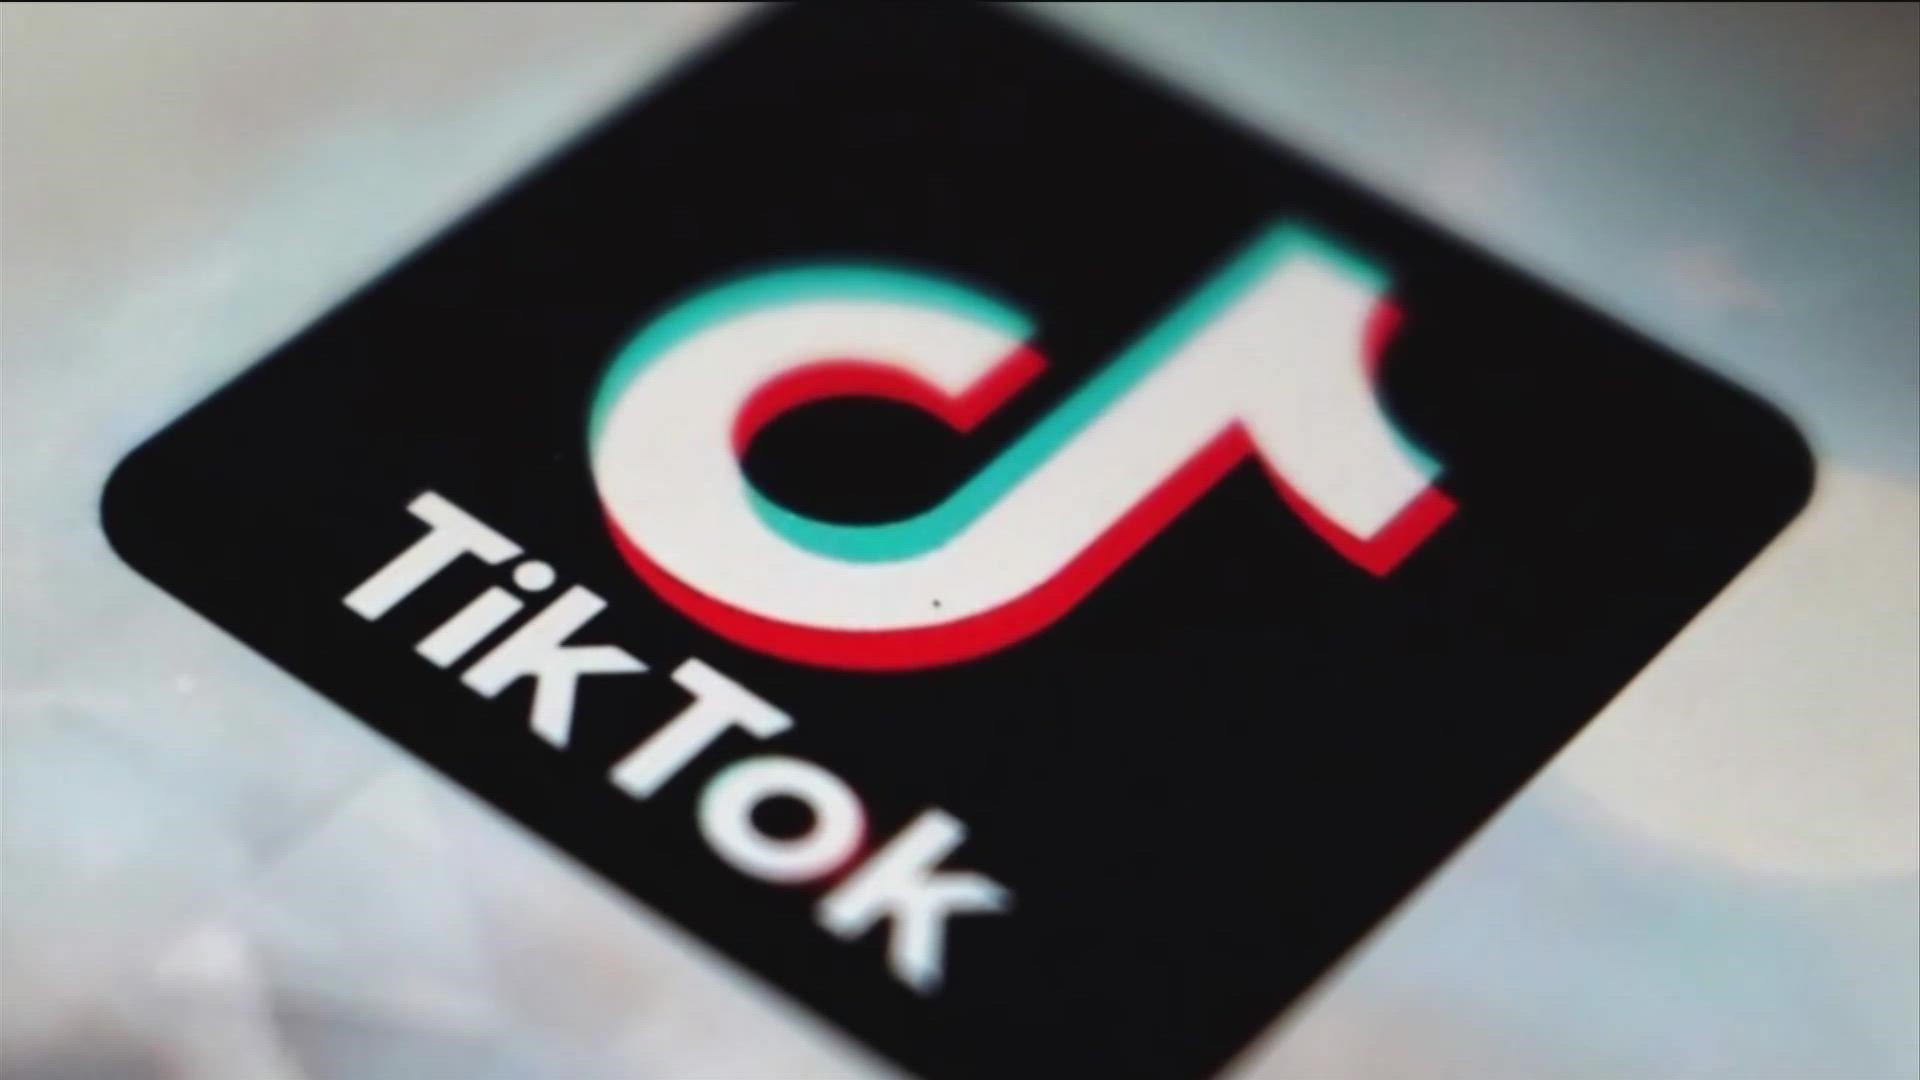 The coalition aims to determine if TikTok contributes to youth mental health problems and, in extreme cases, suicidal thoughts.